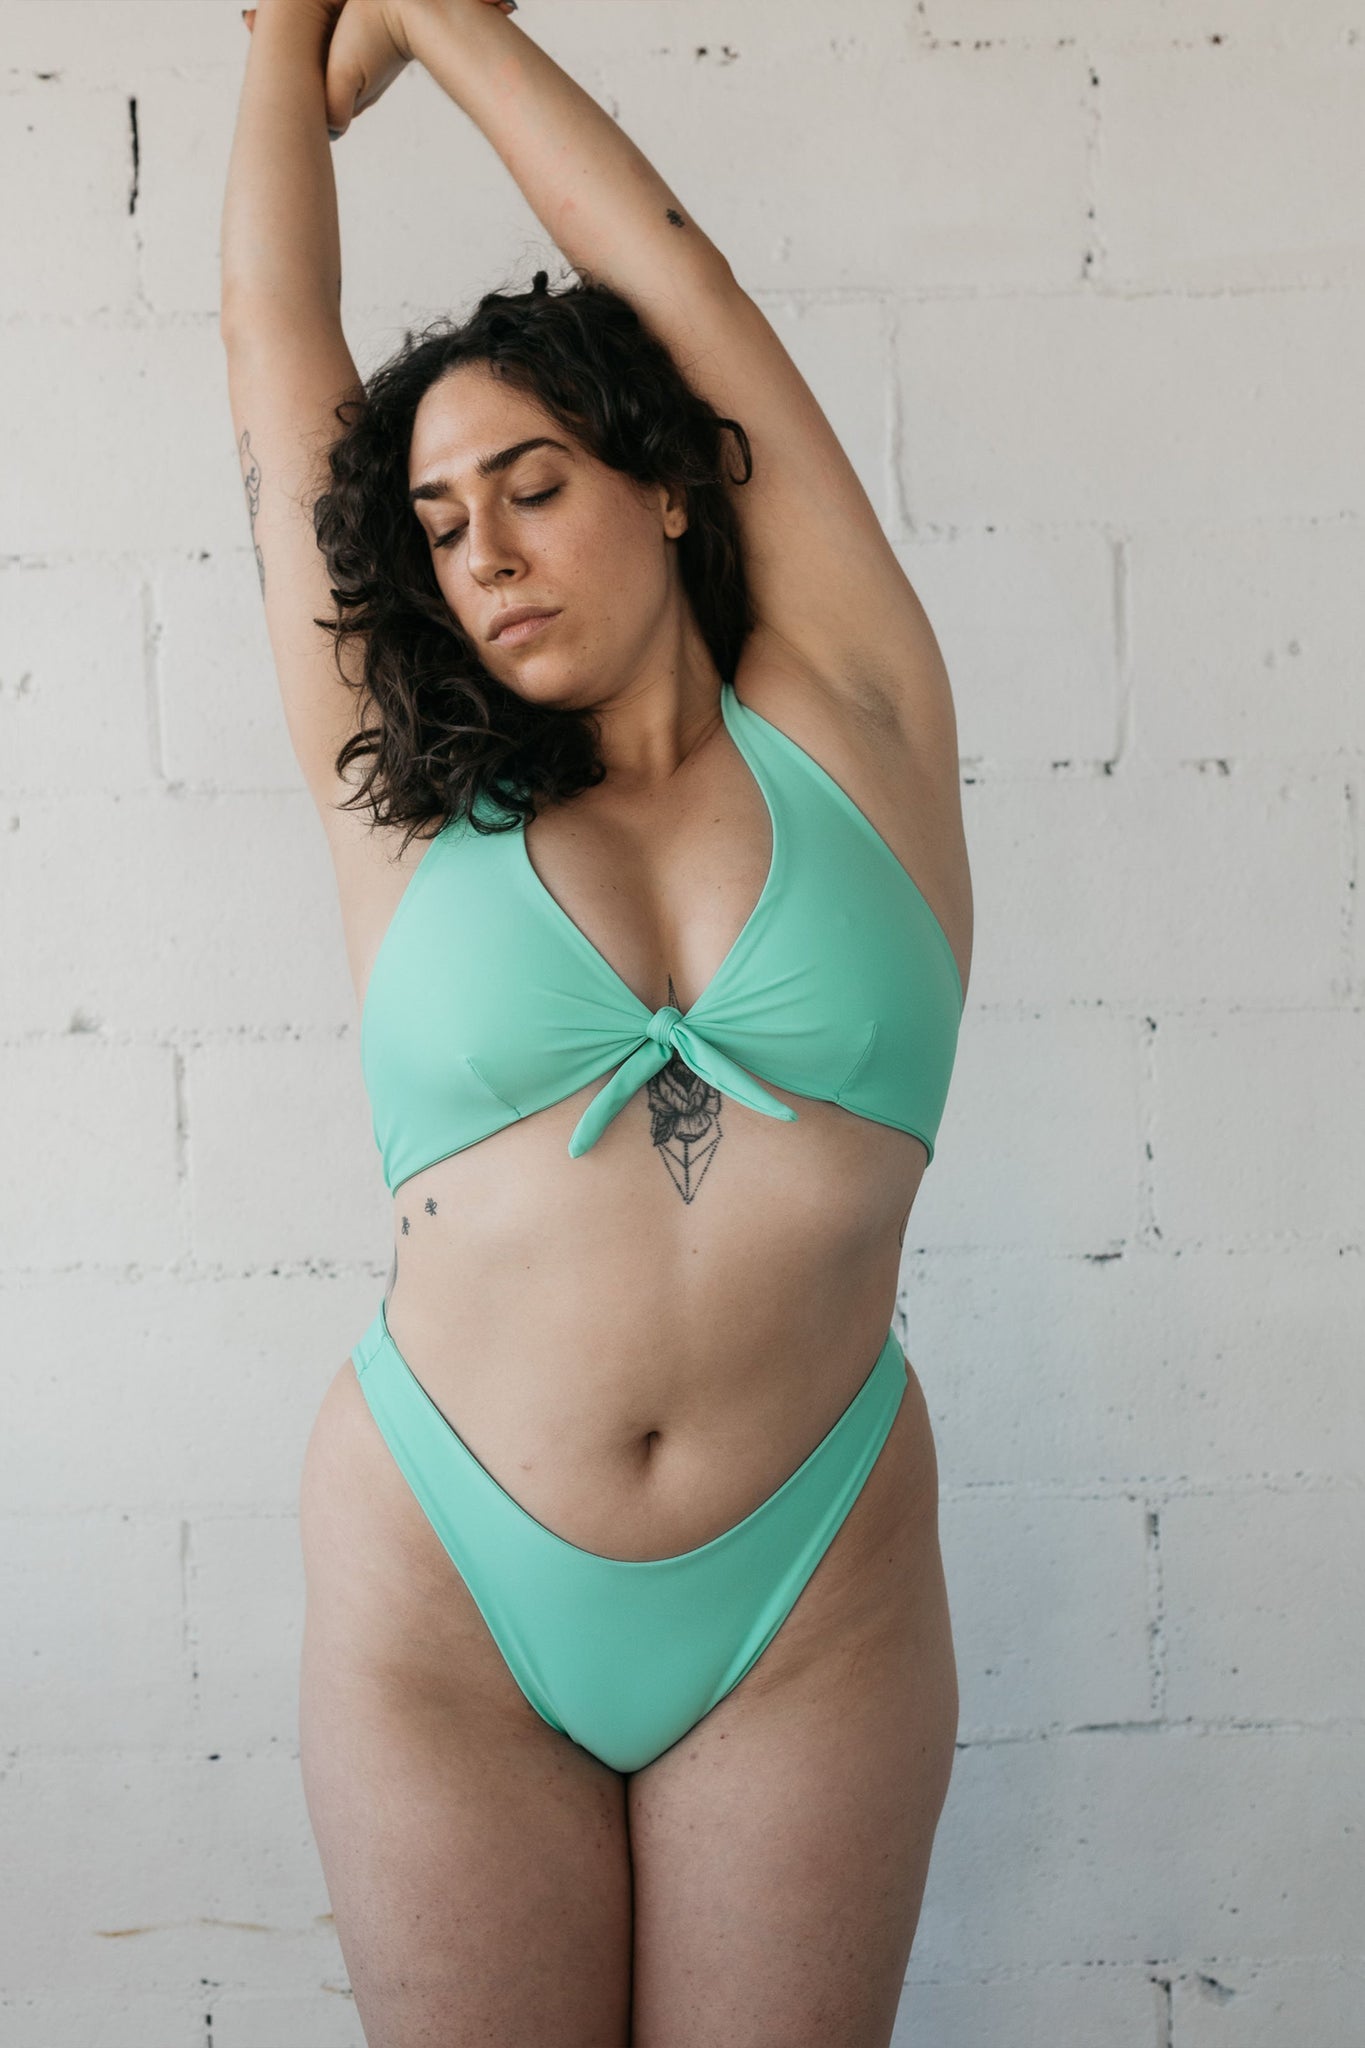 A woman leaning to the side with her arms stretched above her wearing high cut turquoise bikini bottoms and a matching tie front turquoise bikini top.